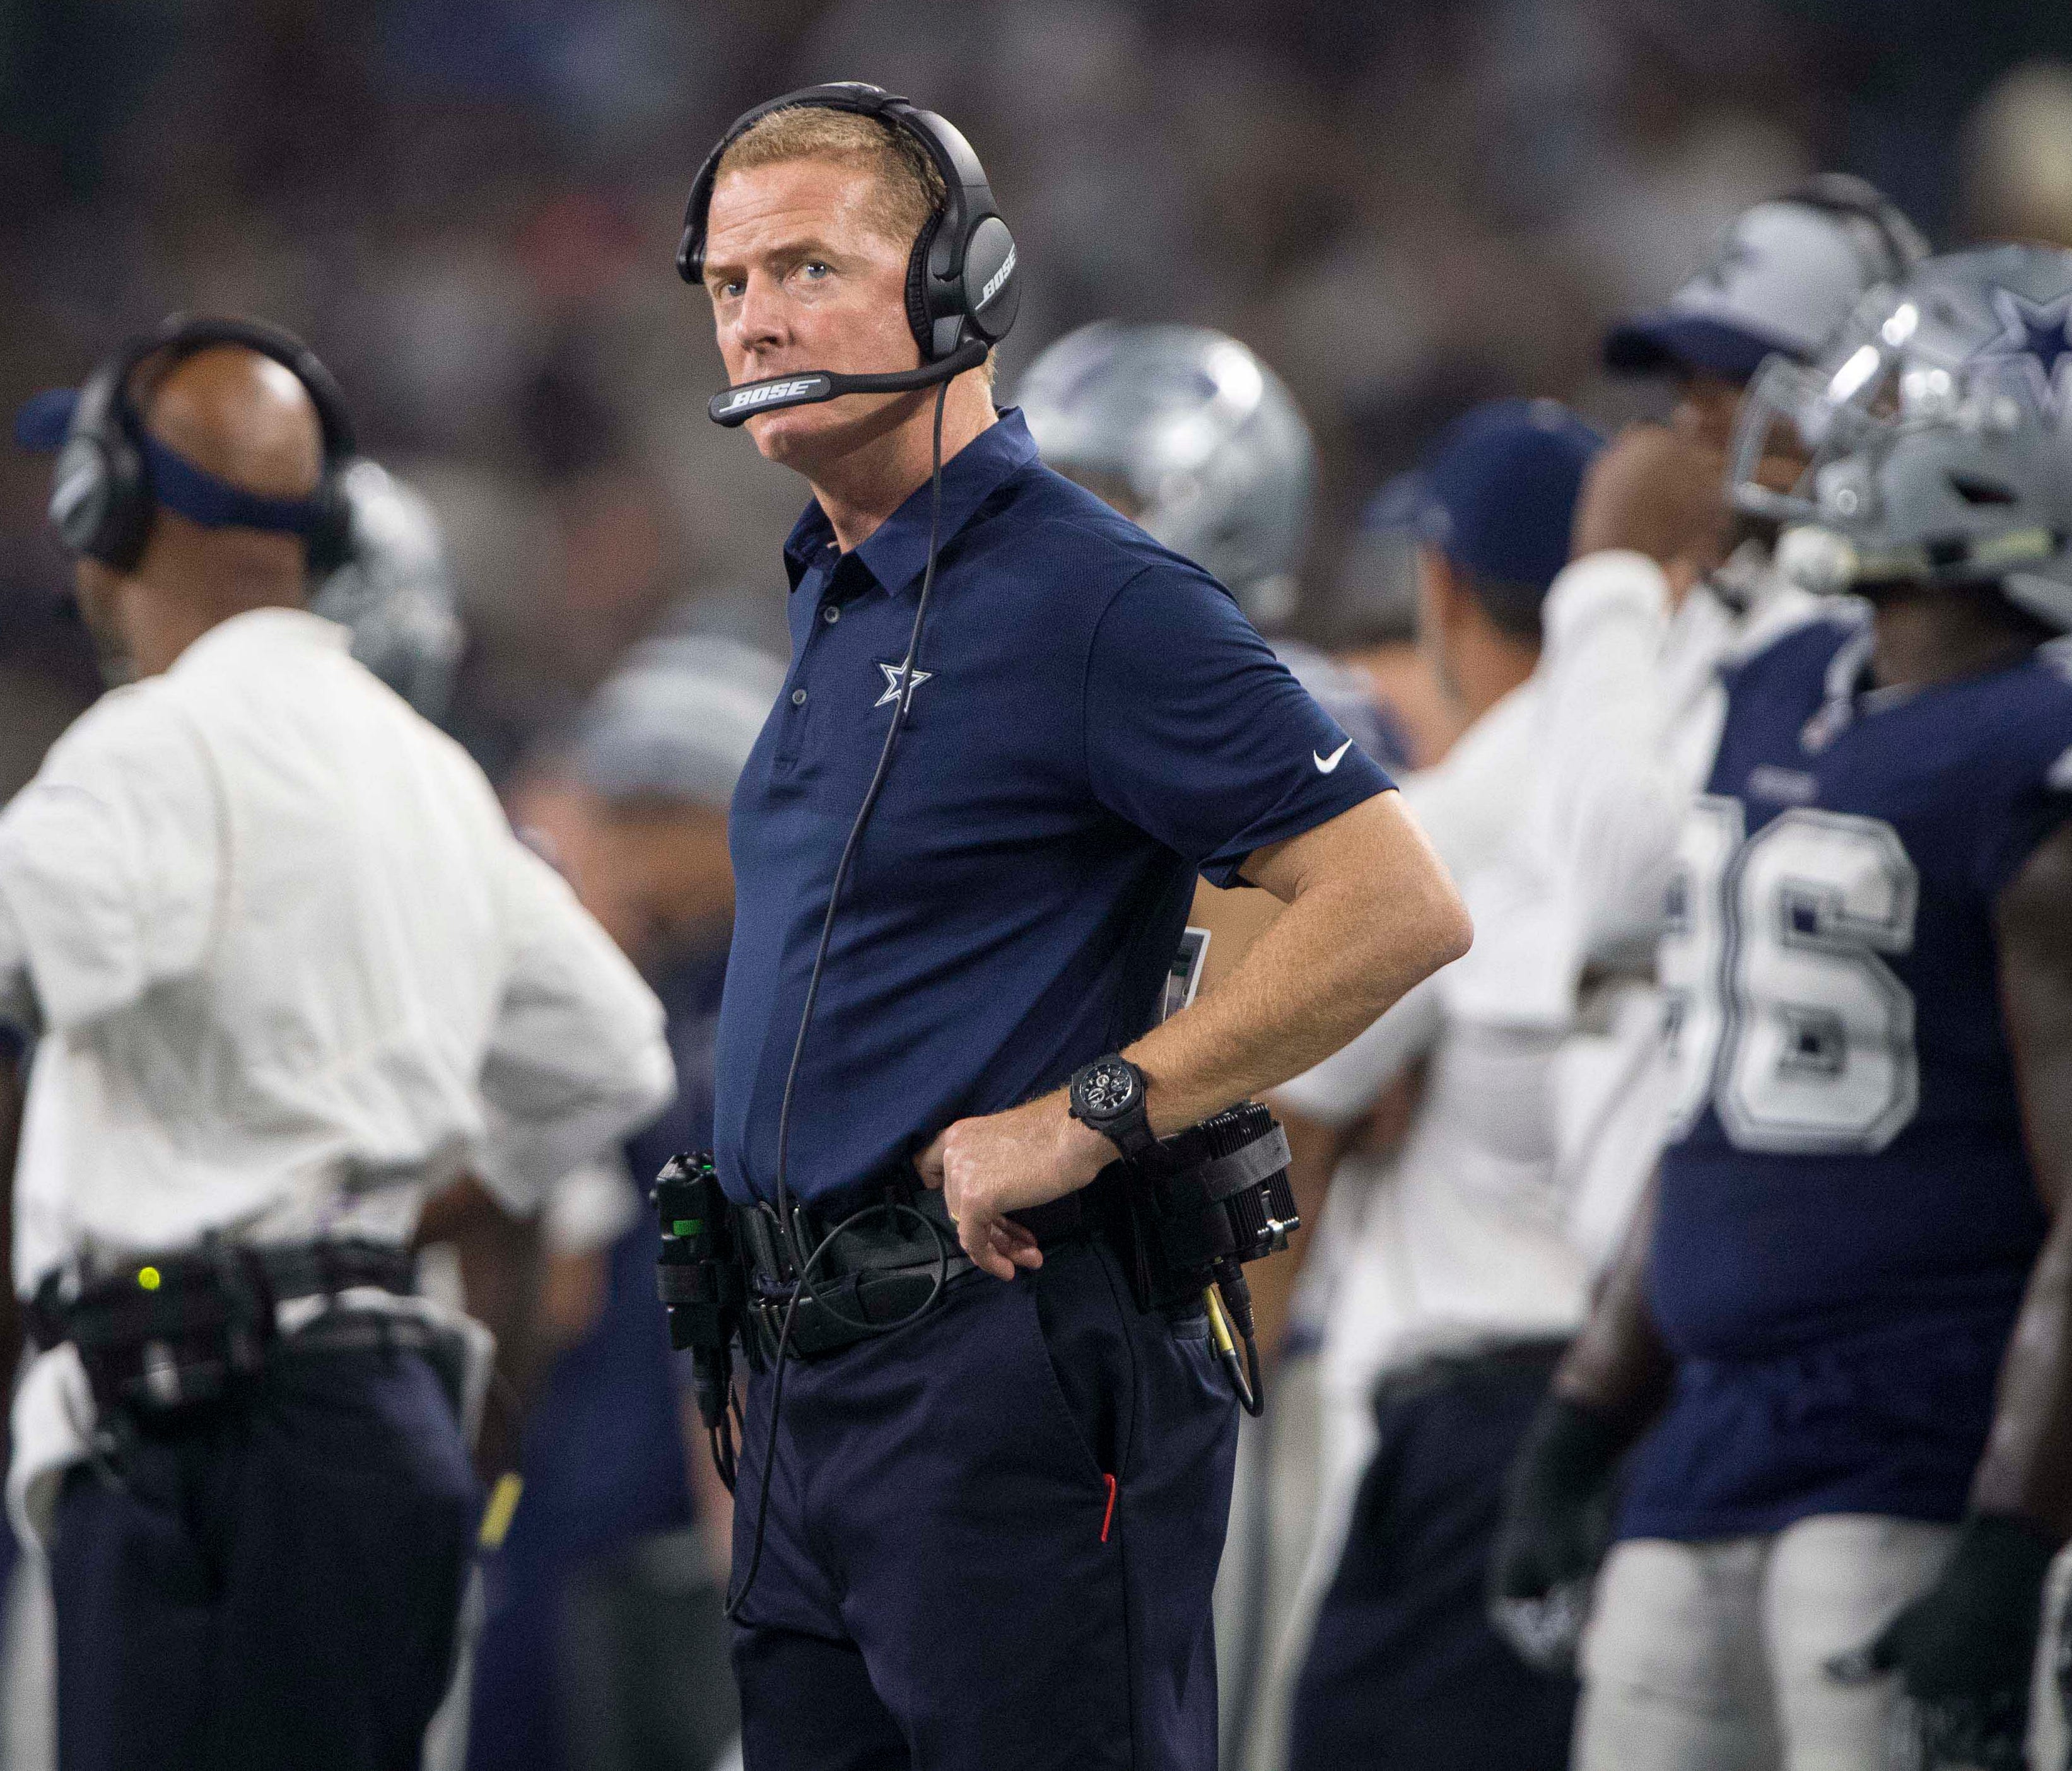 Dallas Cowboys head coach Jason Garrett checks out the replay screen during the second half against the Los Angeles Chargers at AT&T Stadium.